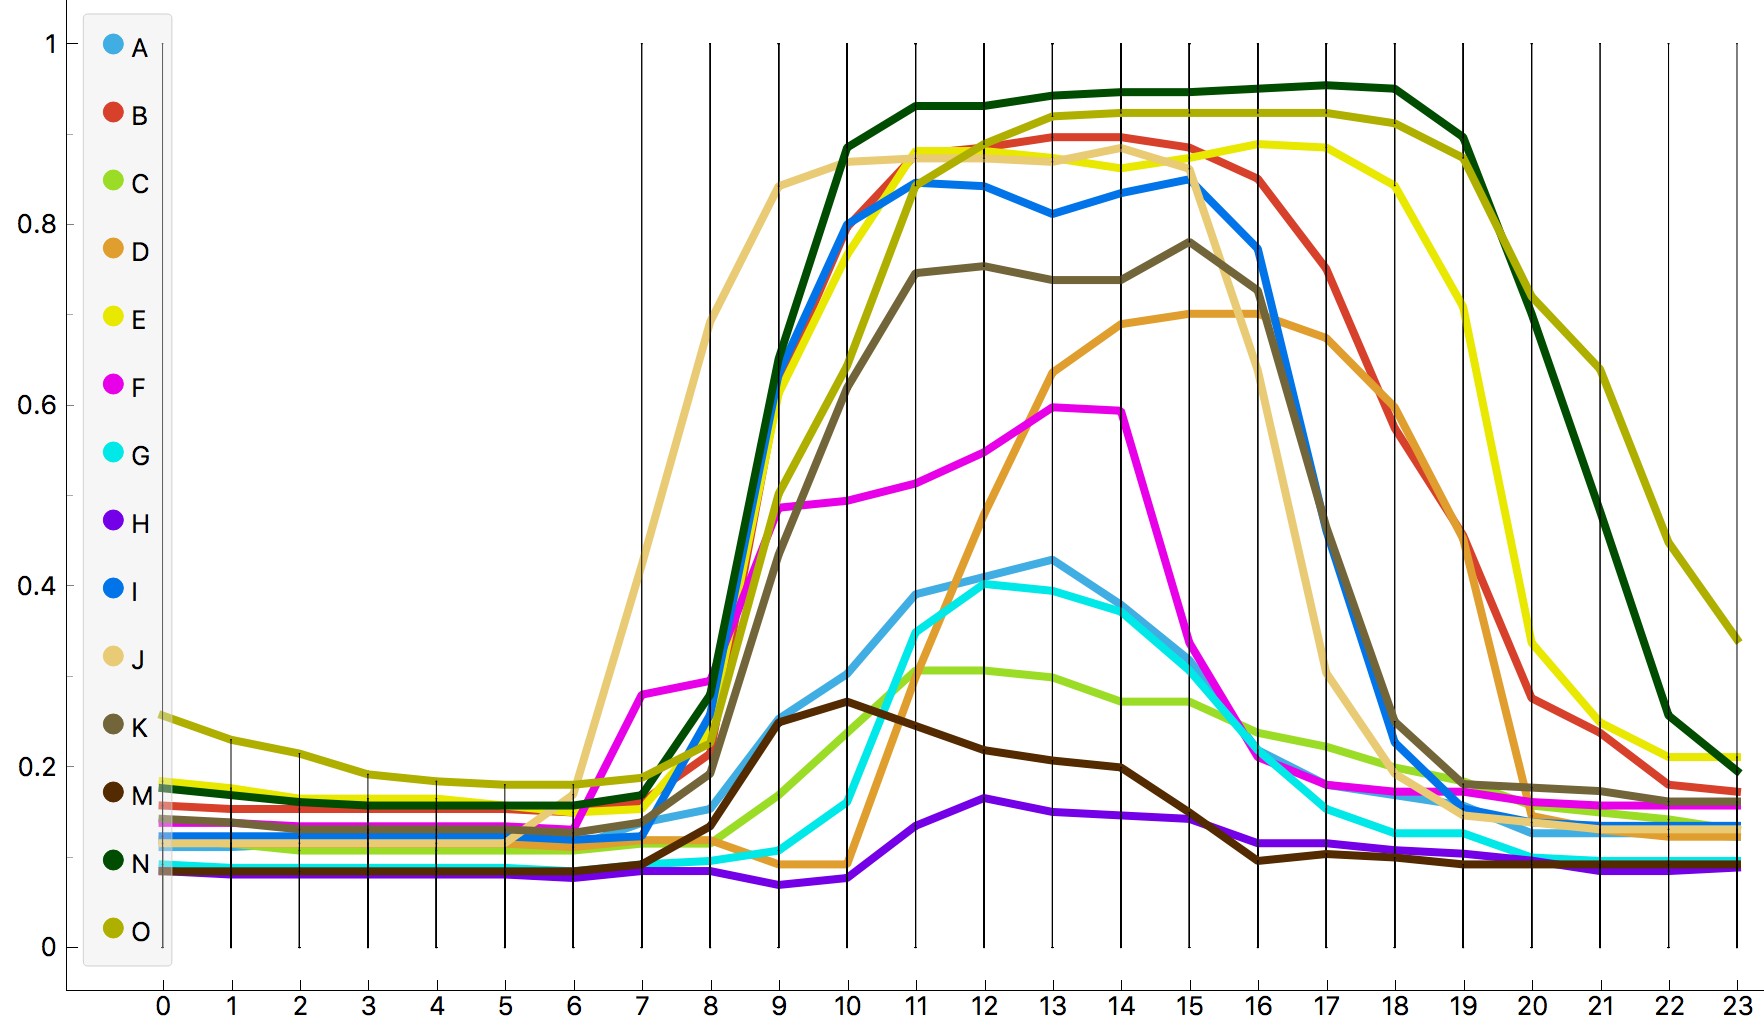 Figure 3: Room occupancy by the time of day